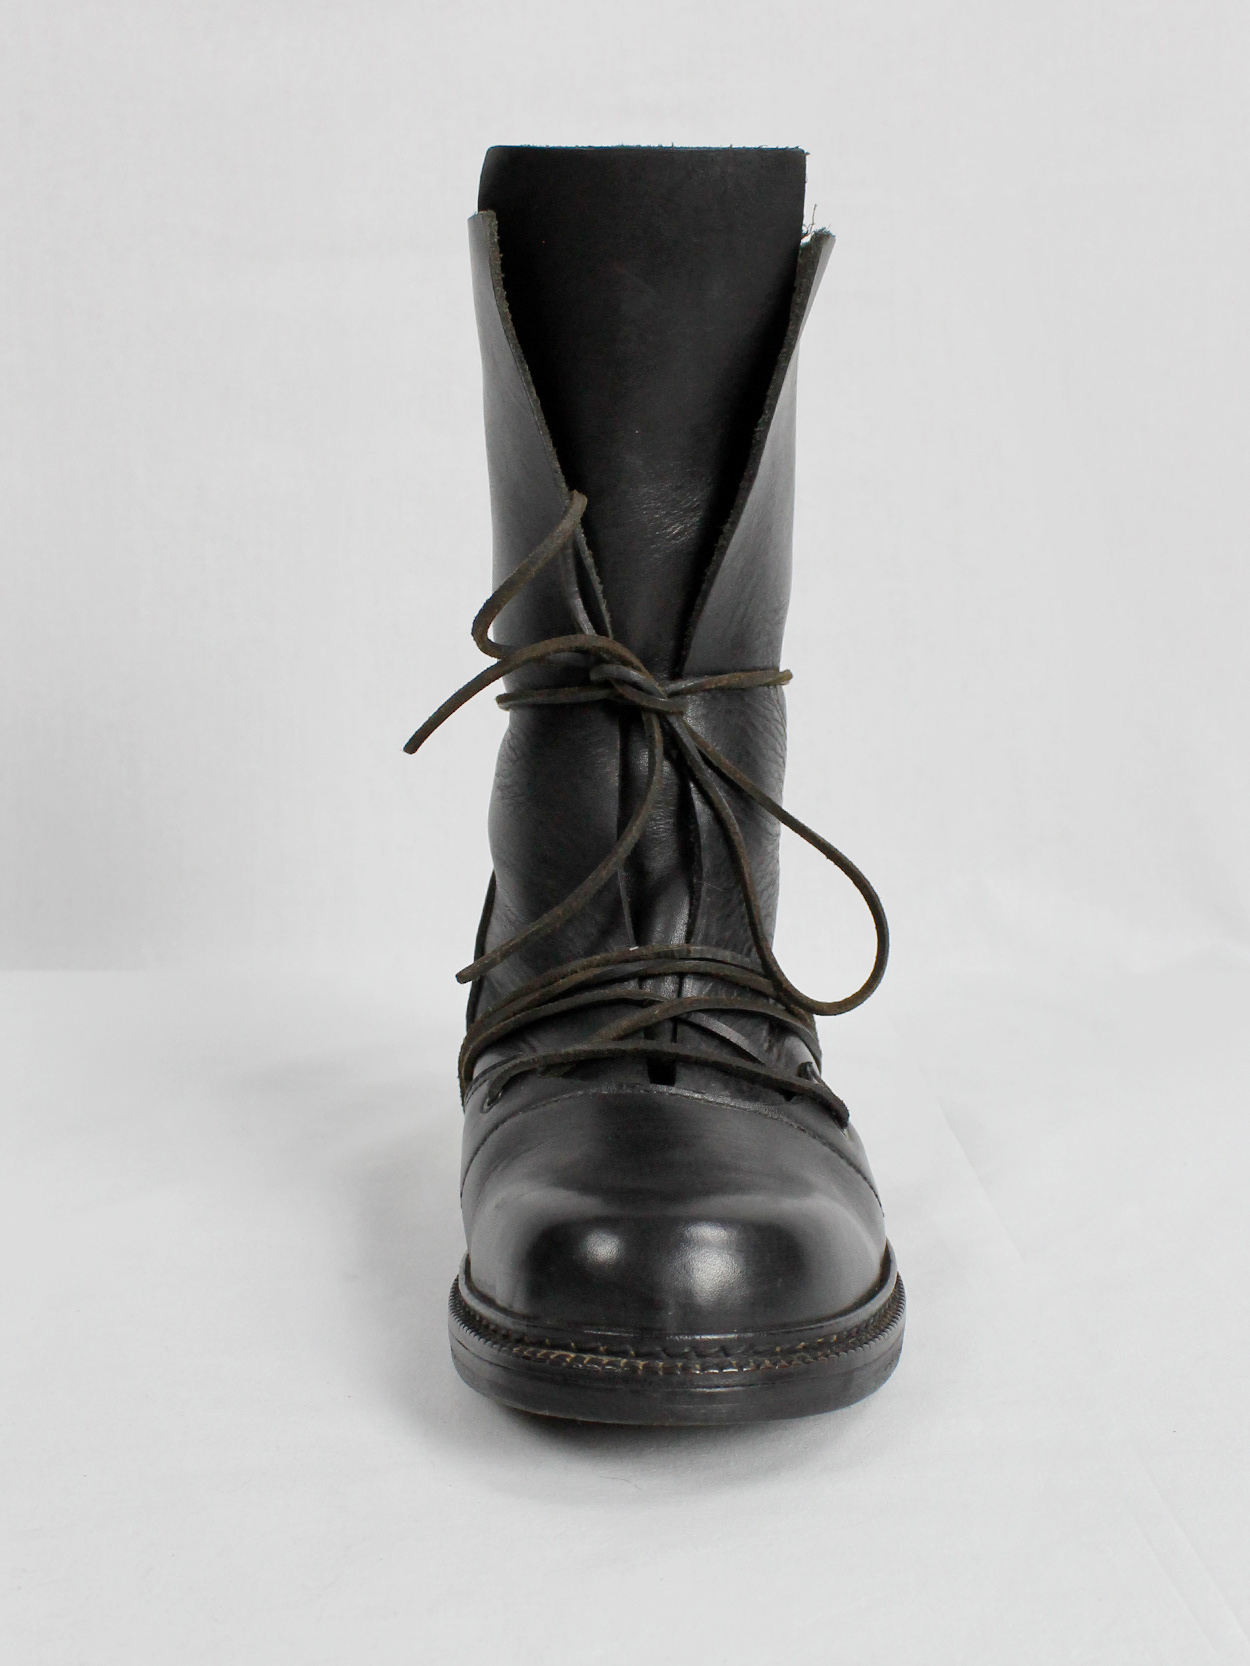 Dirk Bikkembergs black tall boots with laces through the metal heel late 90’s (9)